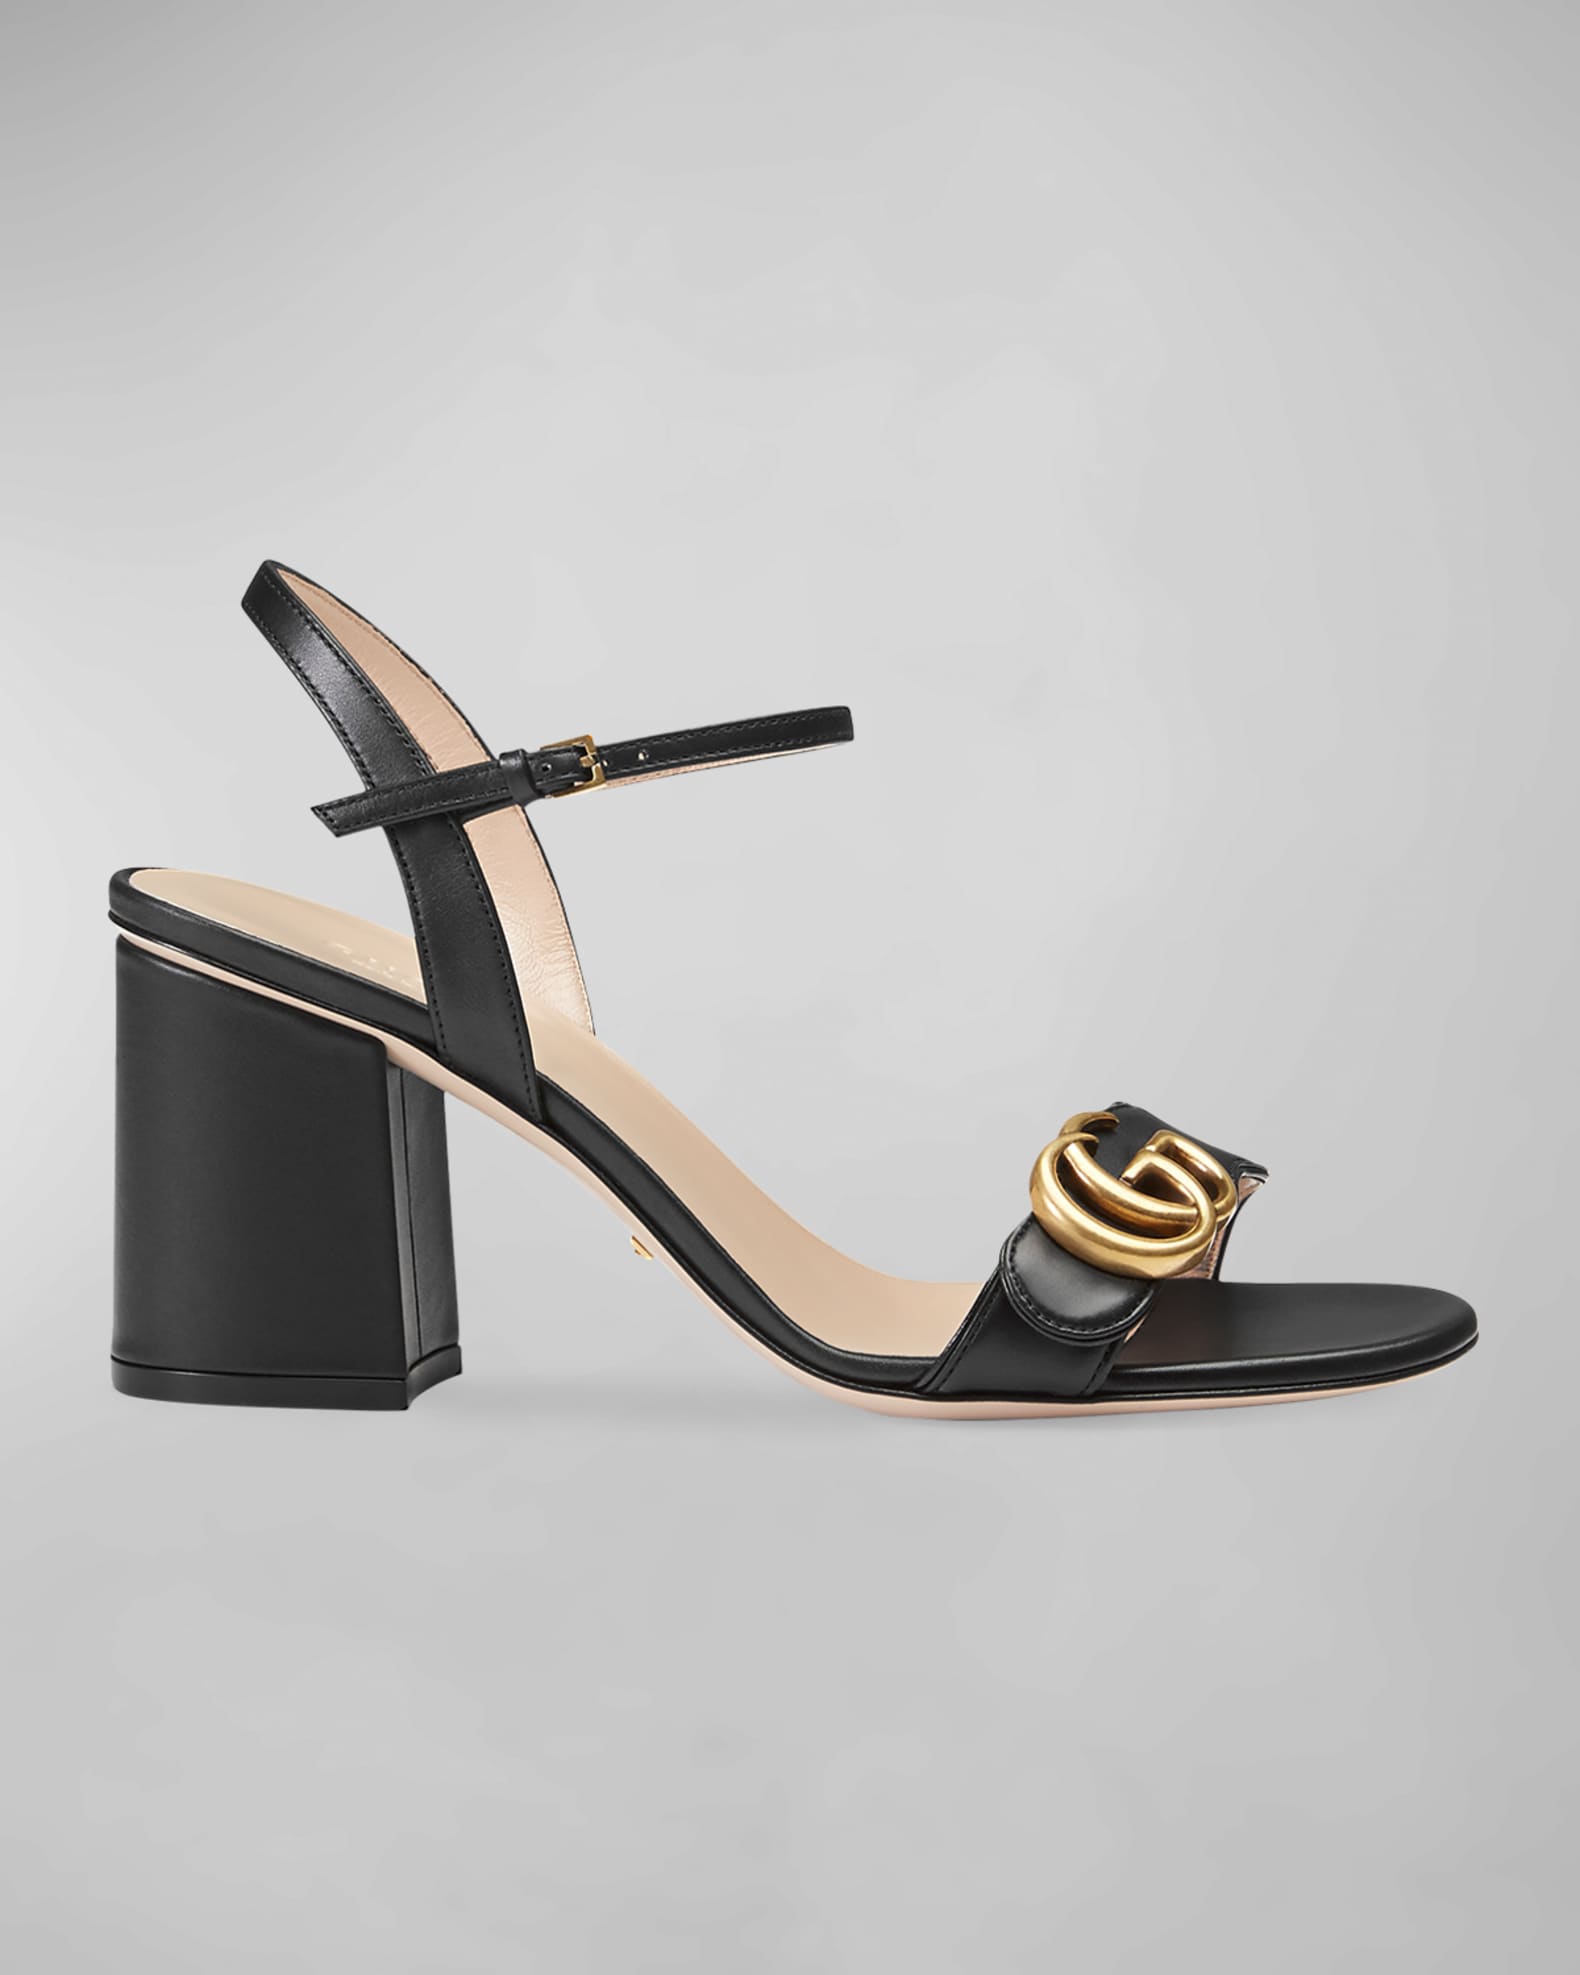 Gucci Marmont Leather GG Sandals | Neiman